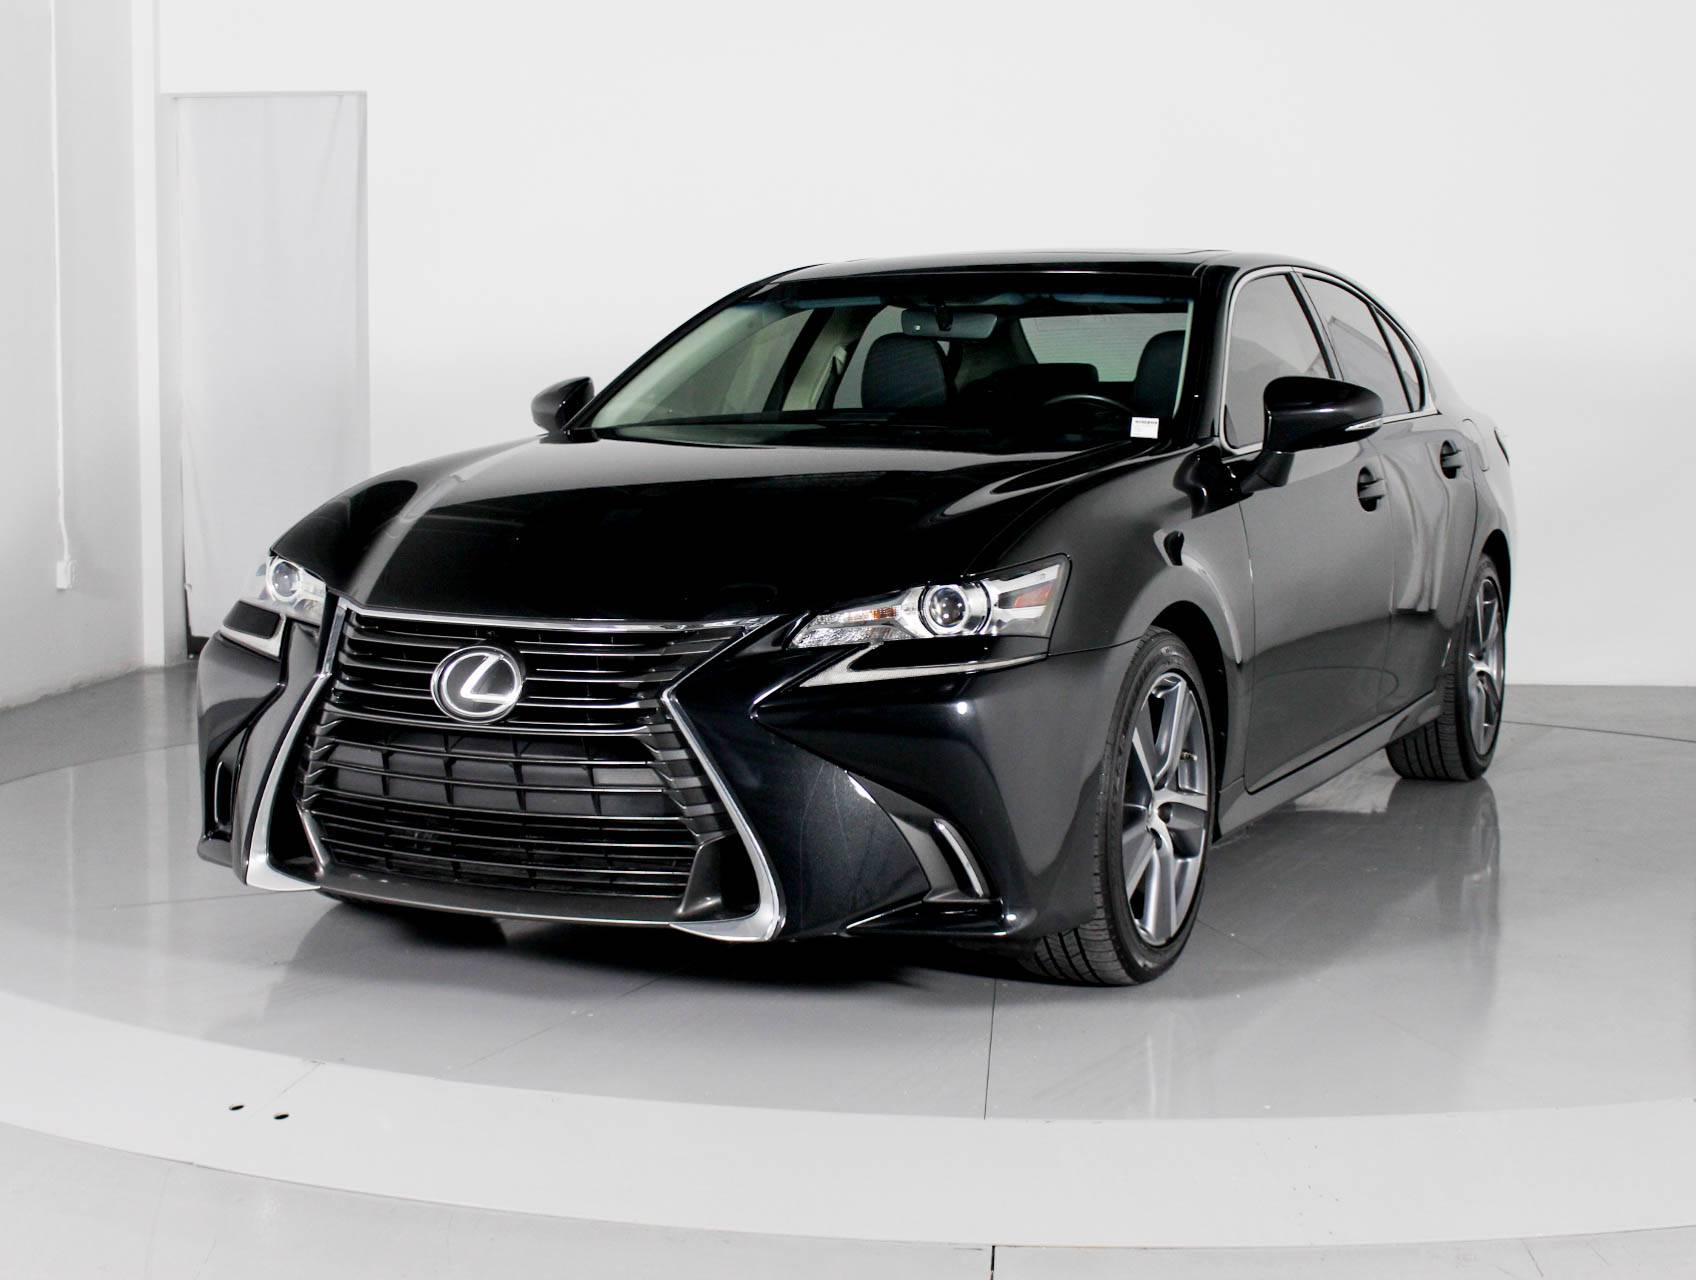 Used 2016 LEXUS GS 200T for sale in MARGATE | 101720